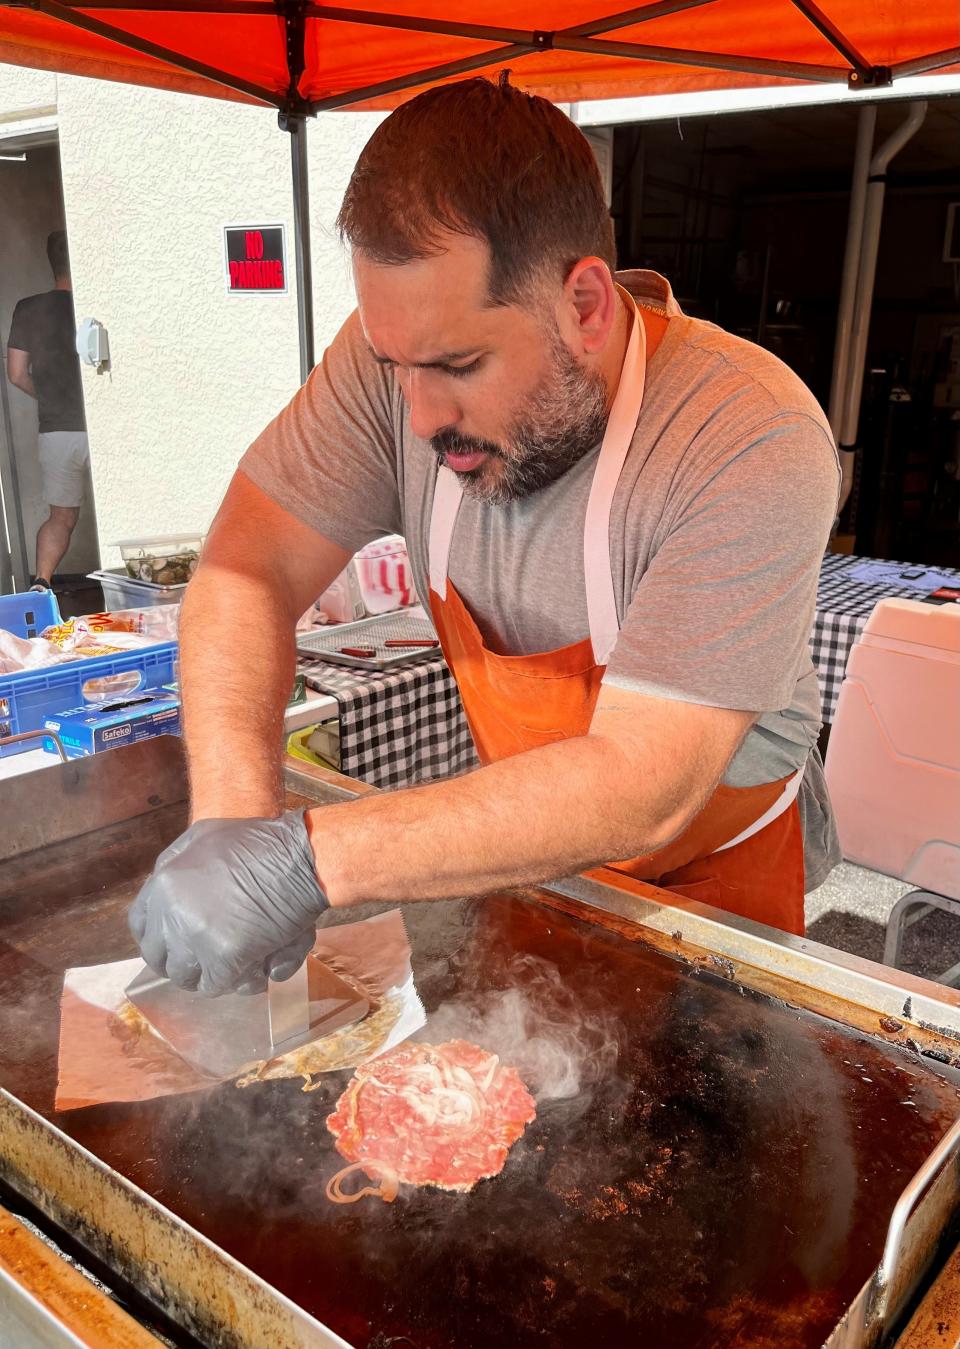 Kyle Cravo fires up his griddle to serve smash burgers at pop-ups around the area.